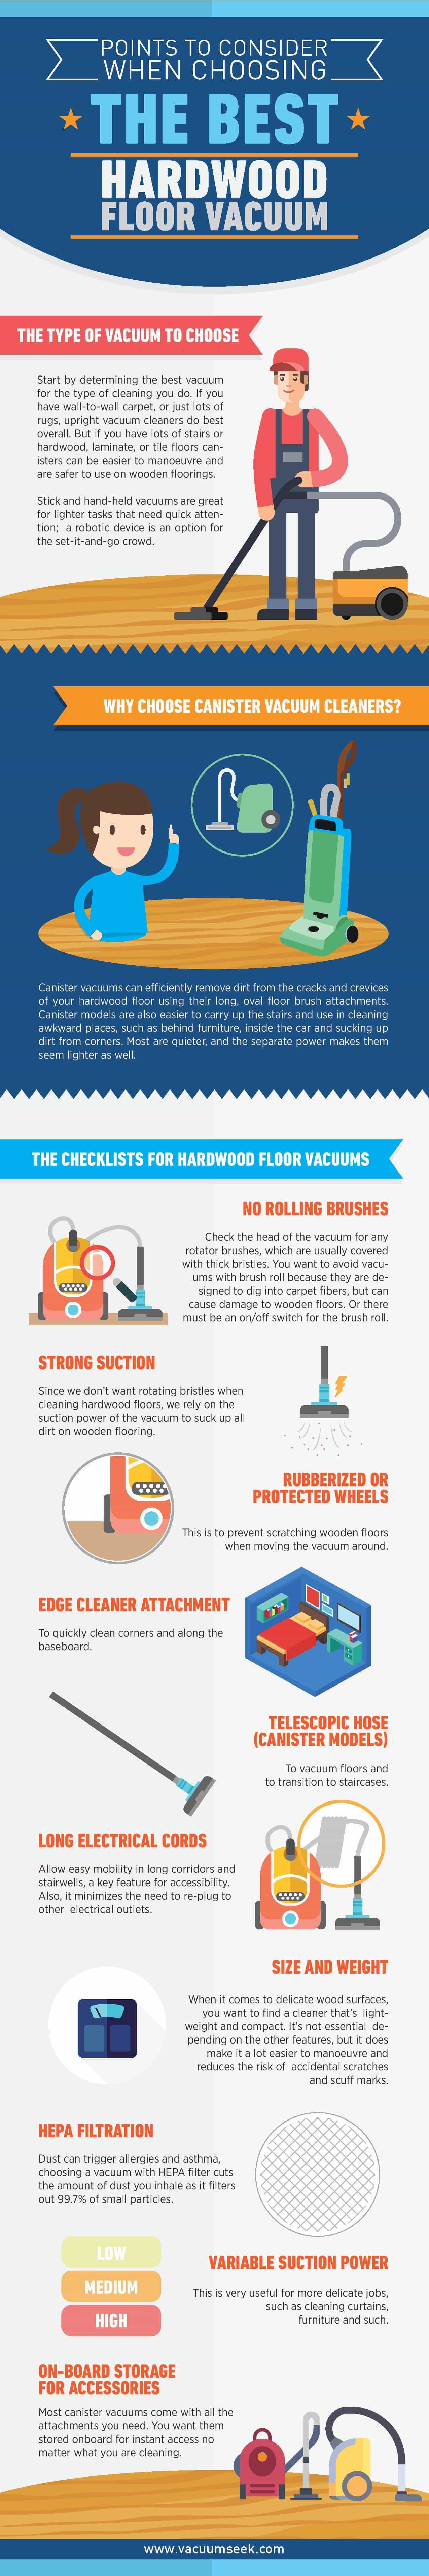 How to Find the Best Vacuum for Hardwood Floors - Infographic